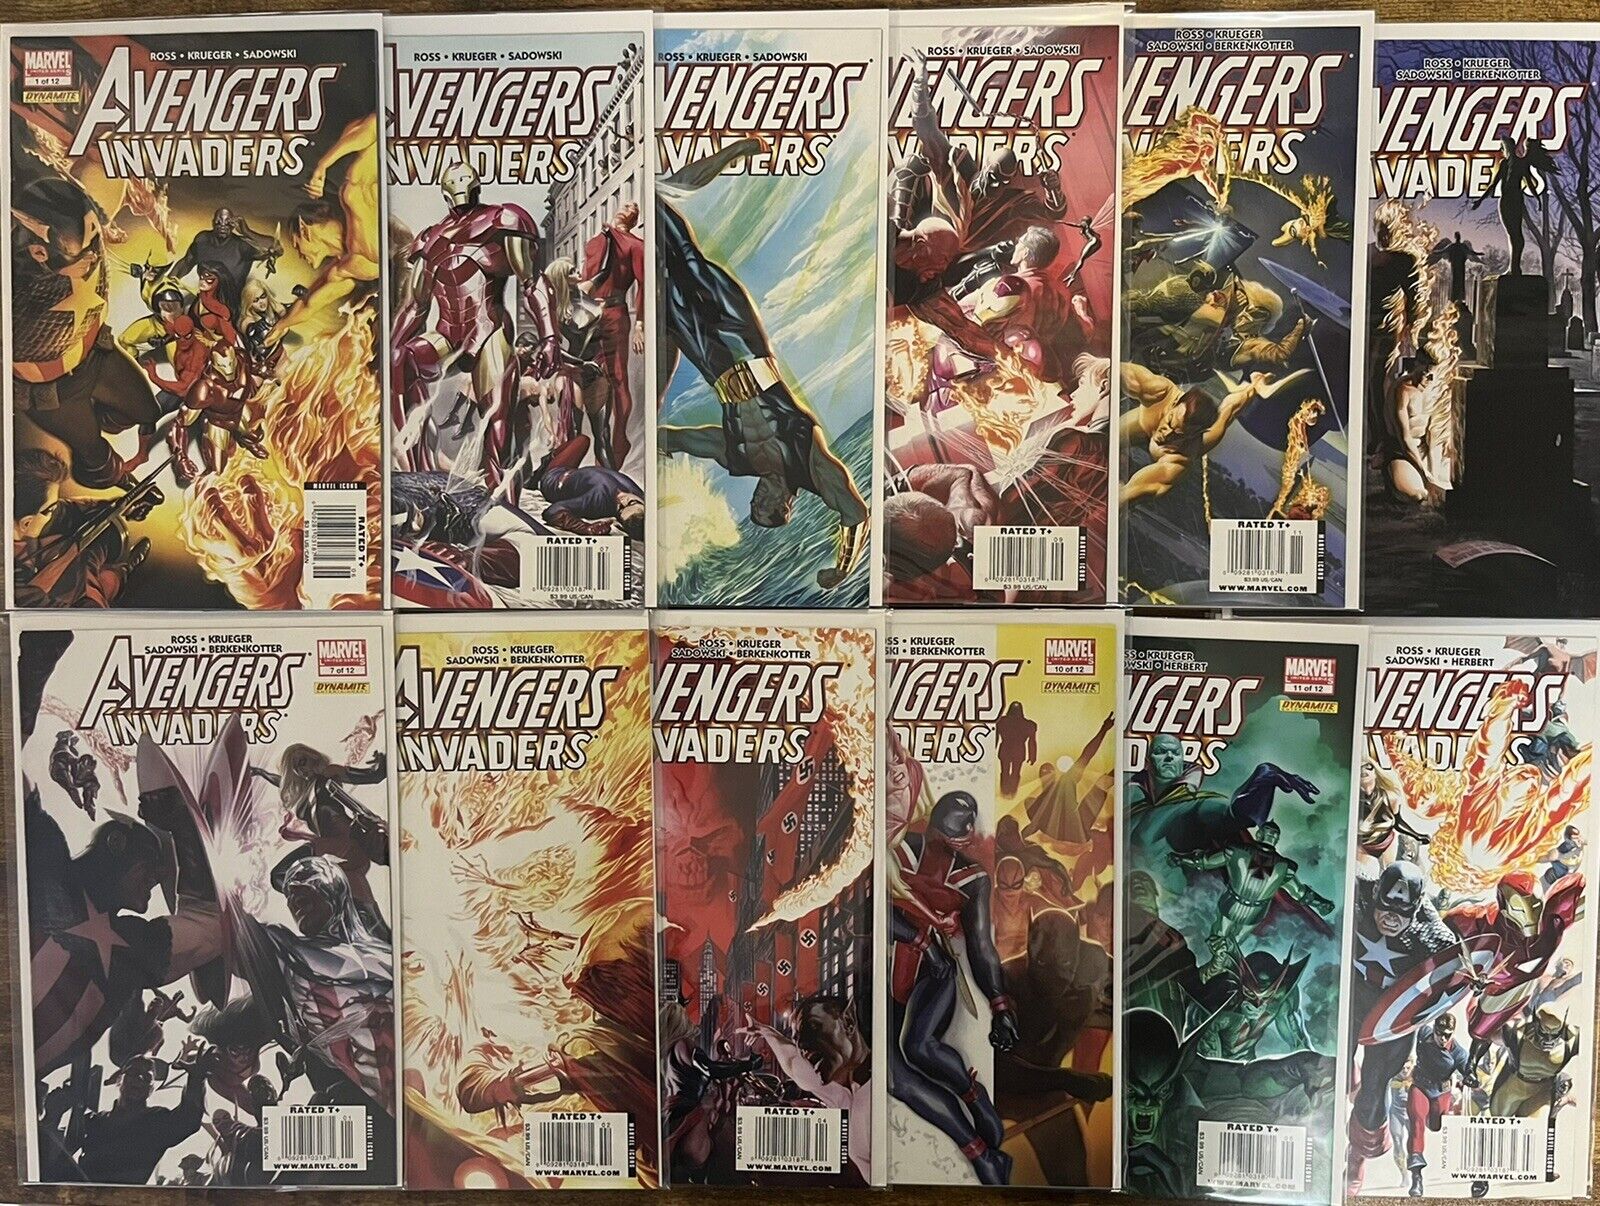 AVENGERS / INVADERS 1-12 EXTREMELY RARE NEWSSTANDS ALEX ROSS COVERS & STORIES